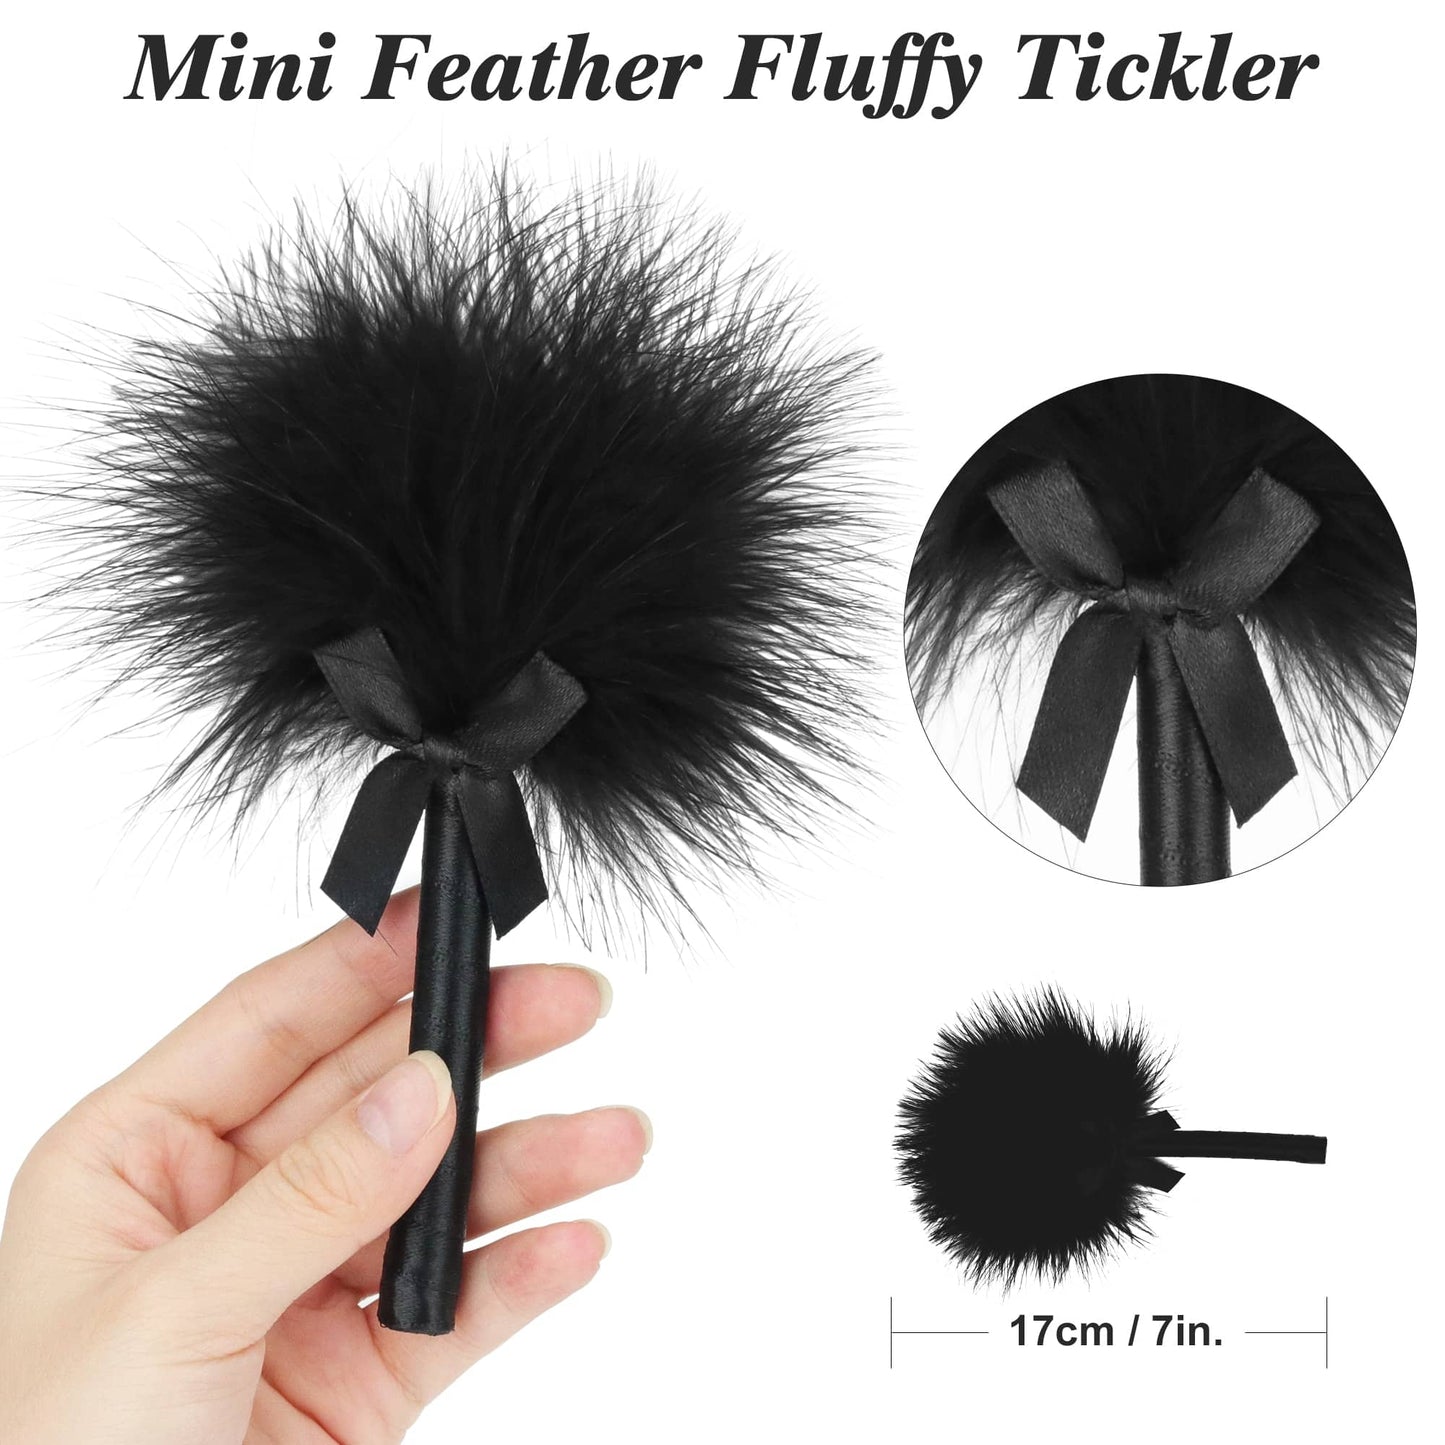 The size of the feather tickler of the bdsm bondage sets